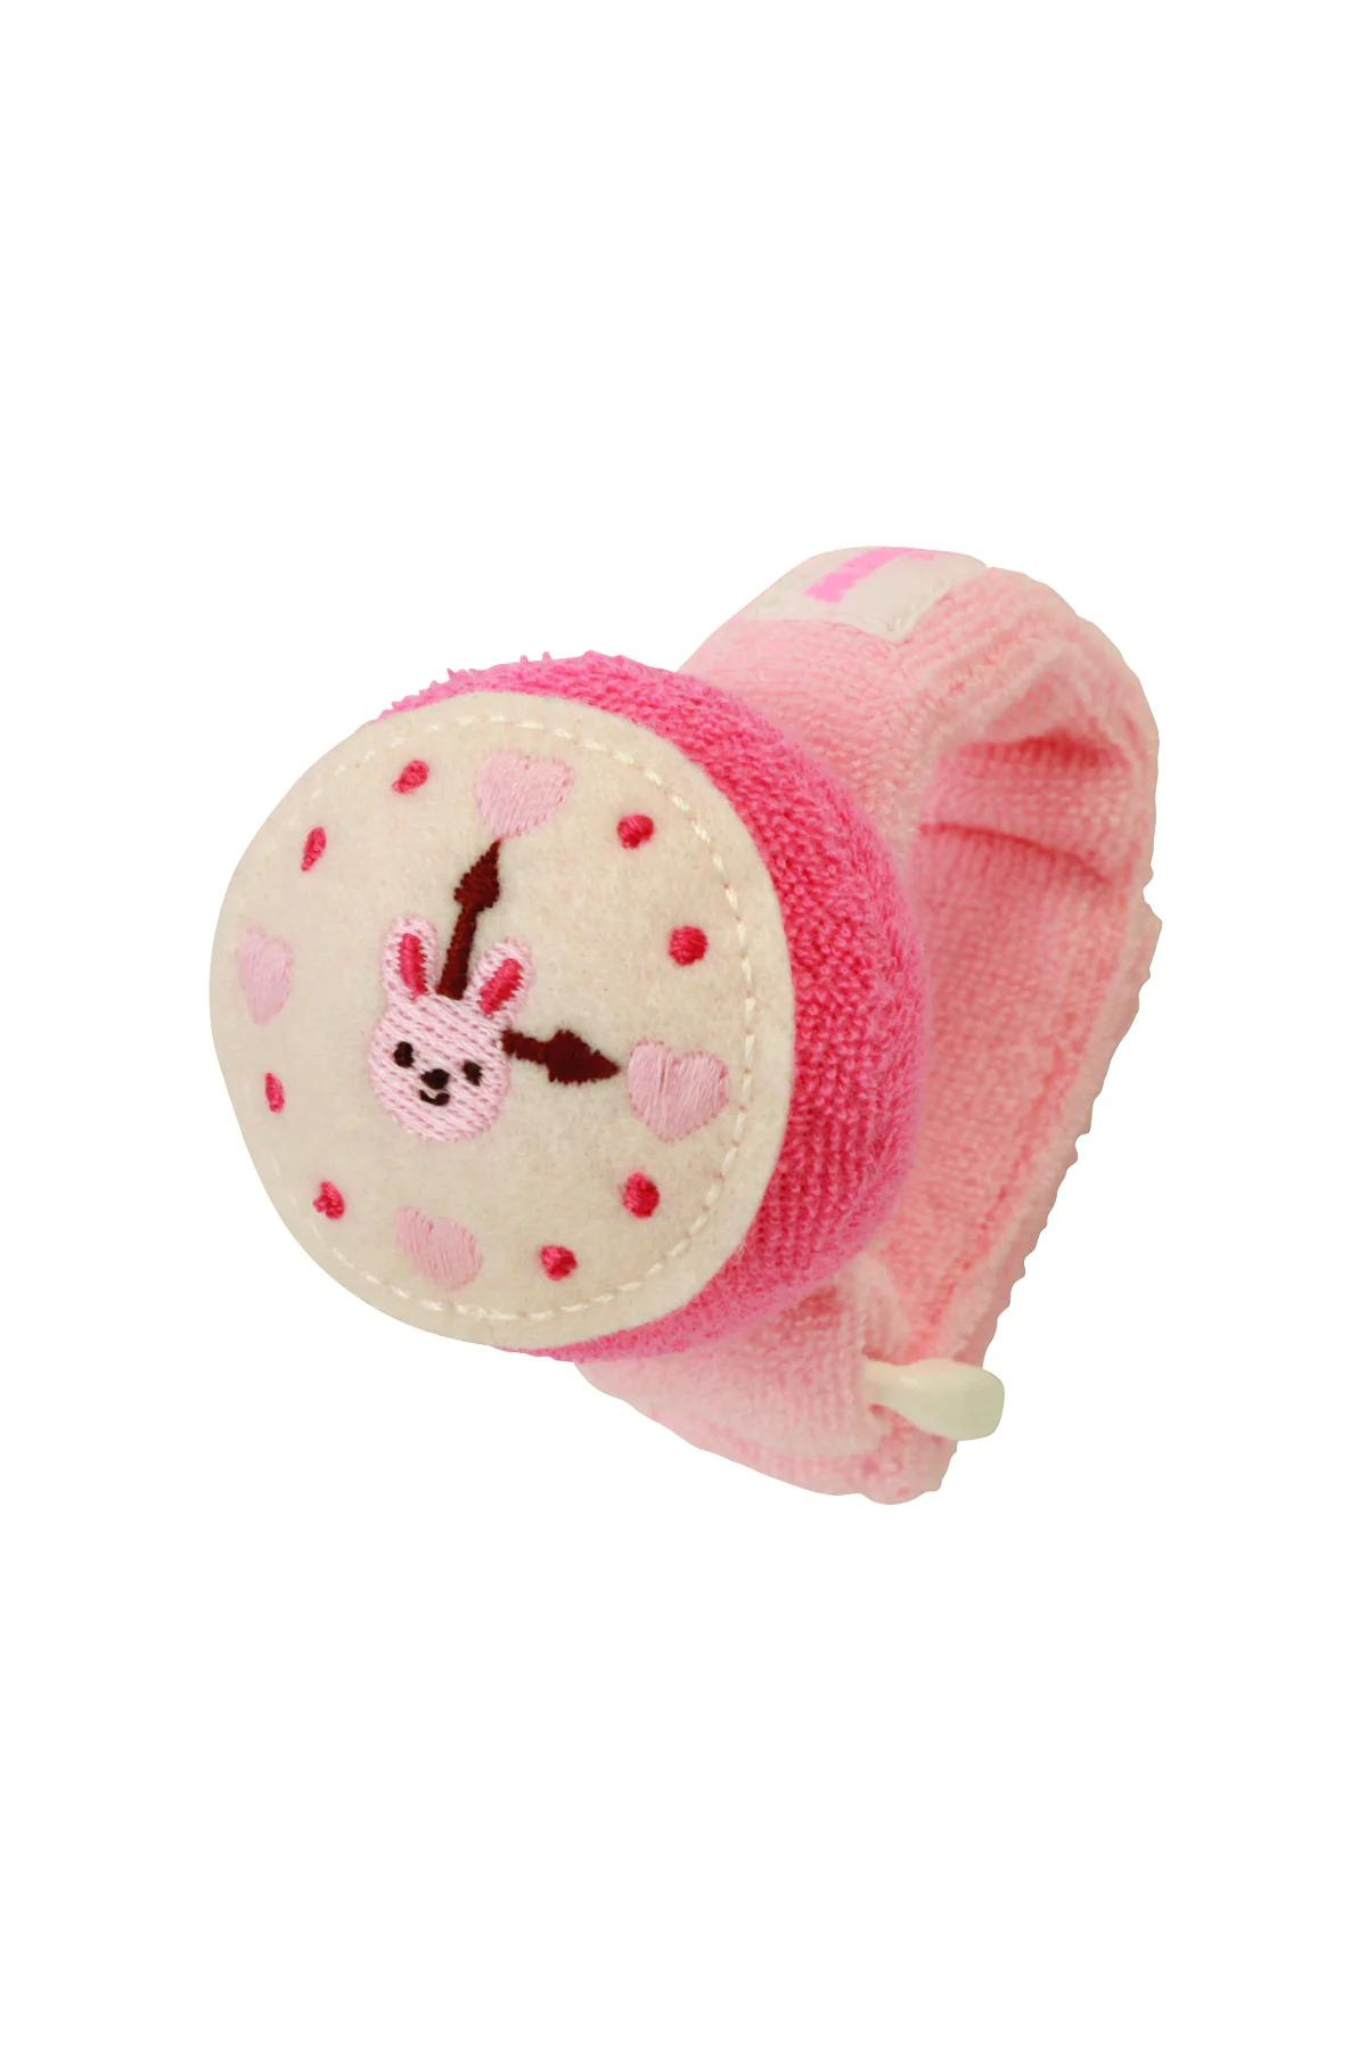 Adorable Wrist Watch Rattle